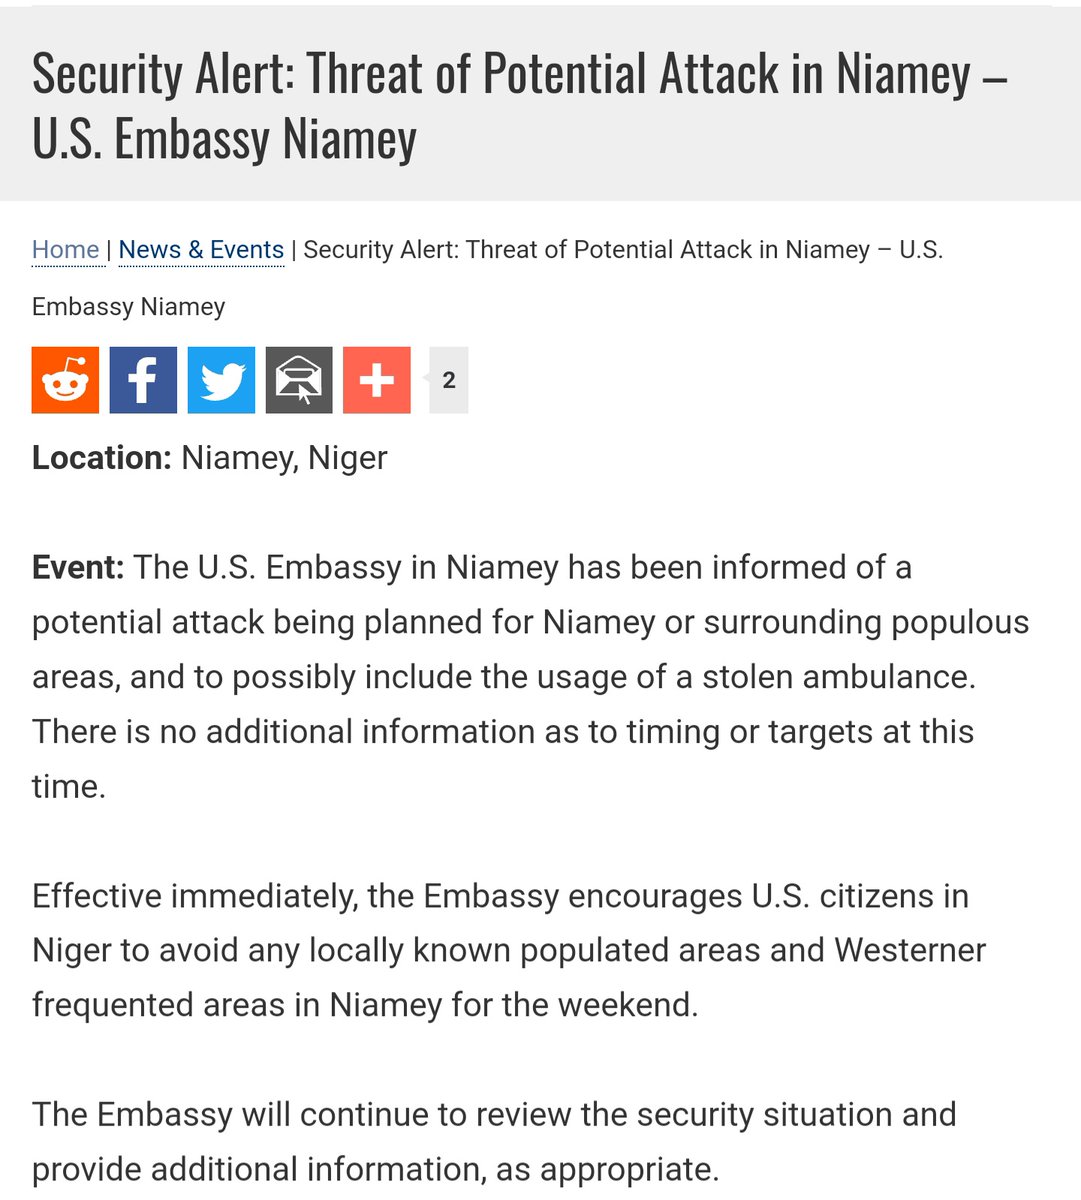 US Embassy in Niger warns of possible attack being planned for Niamey or surrounding areas potentially using a stolen ambulance